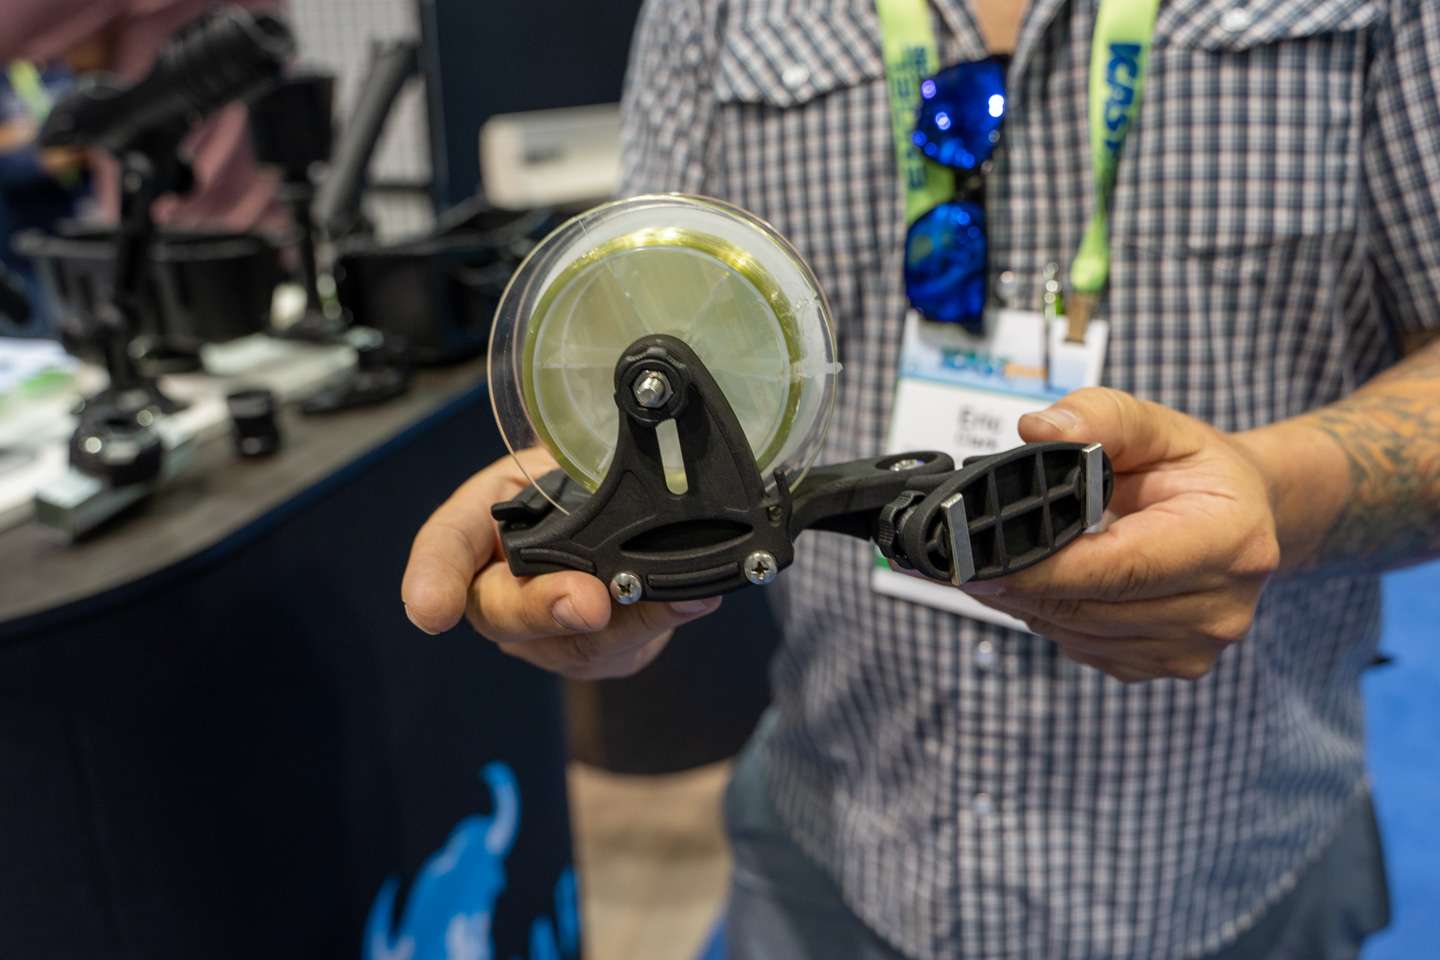 The new YakGear Spooling Station makes spooling a reel extremely easy on a kayak with a detachable clip that will easily connect to your kayak. 